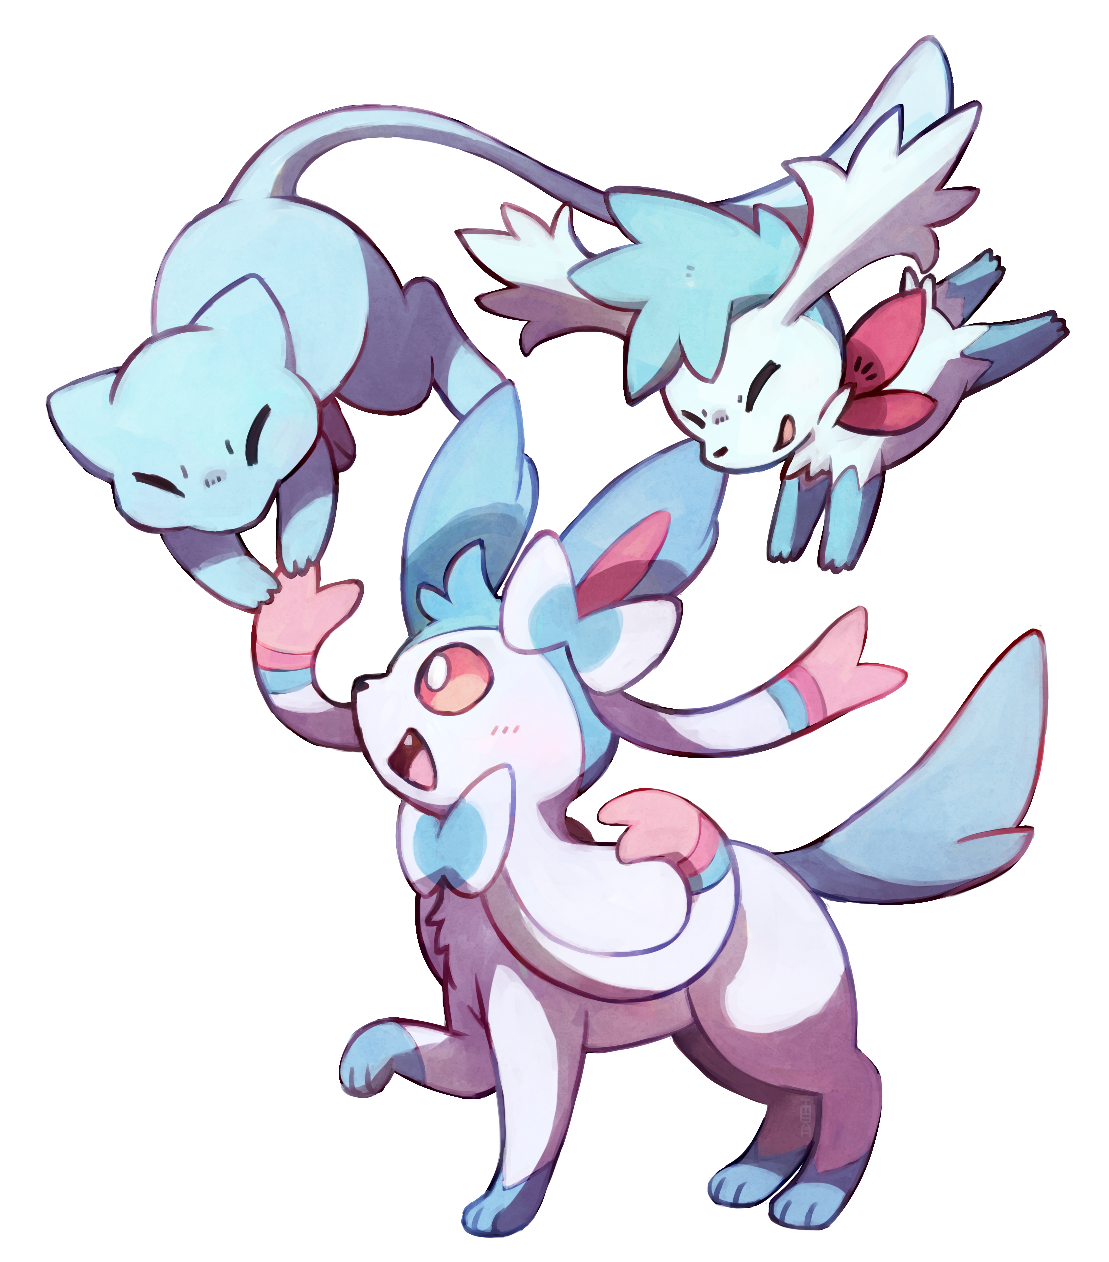 Sylveon / Actual Drawings: “Commission For ”. Mew And Mewtwo, Cute Pokemon Picture, Cute Pokemon Wallpaper